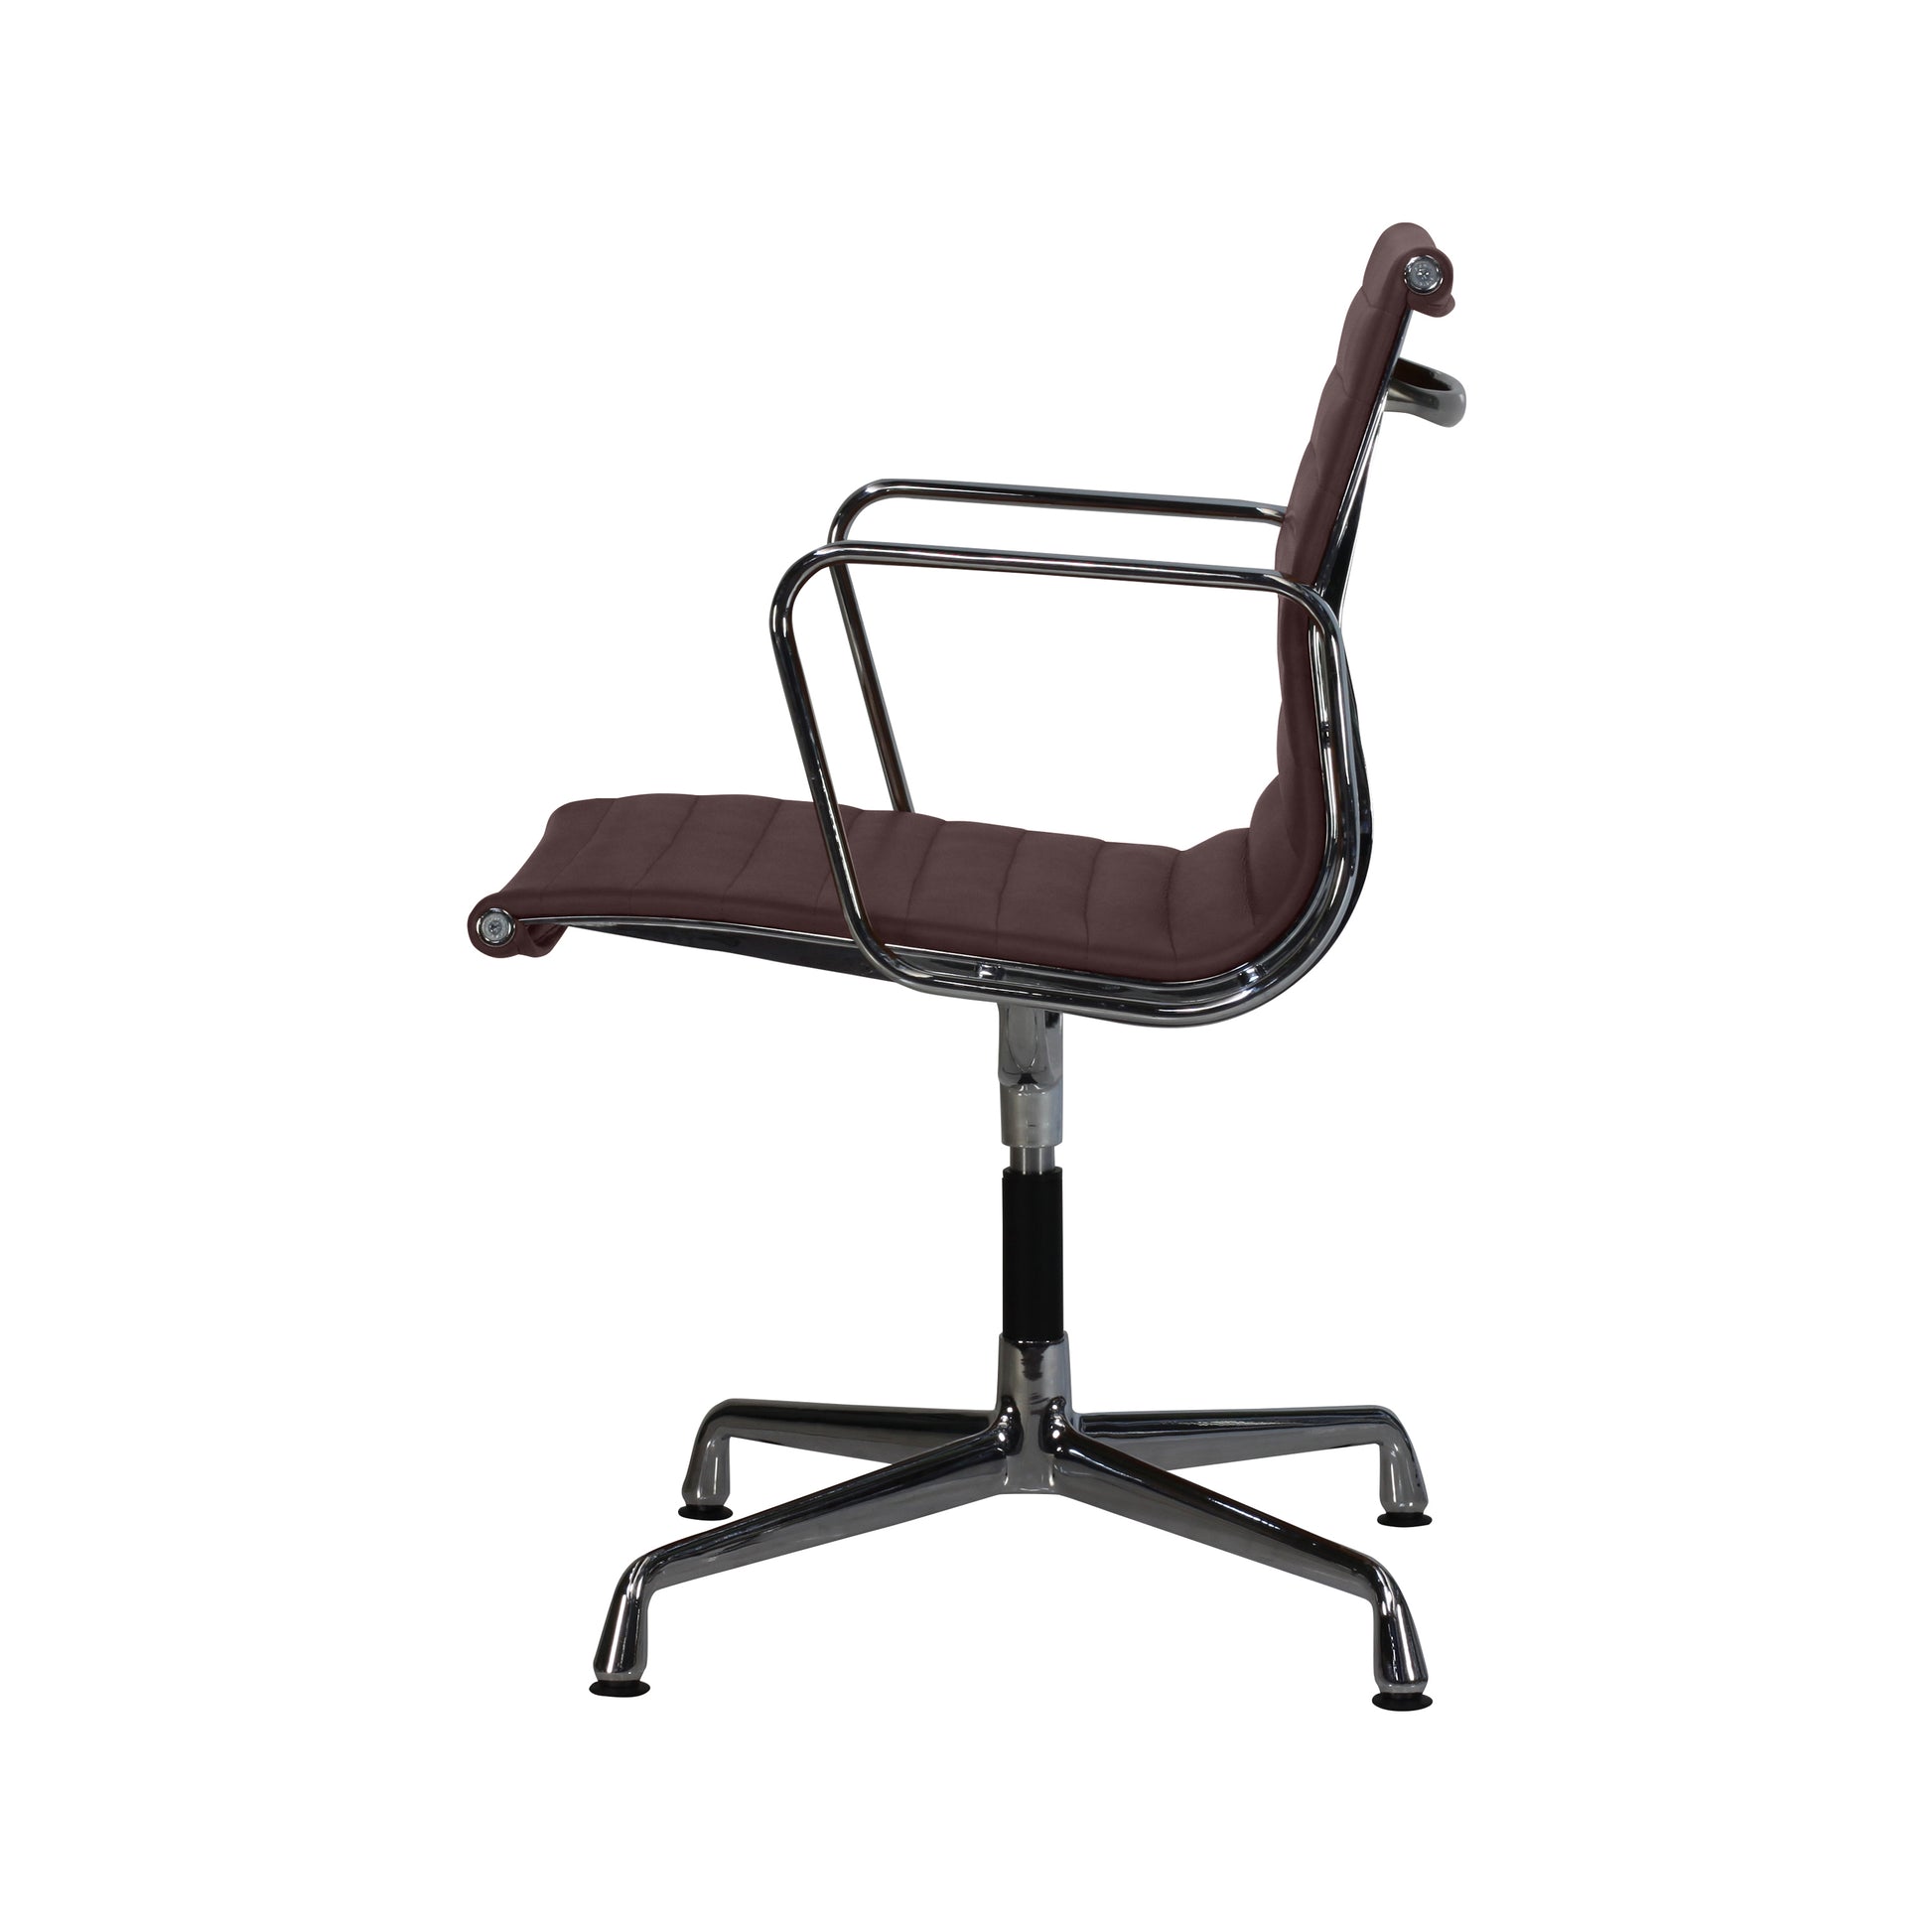 Chair without wheels aluminium style | Chocolate Leather | Side